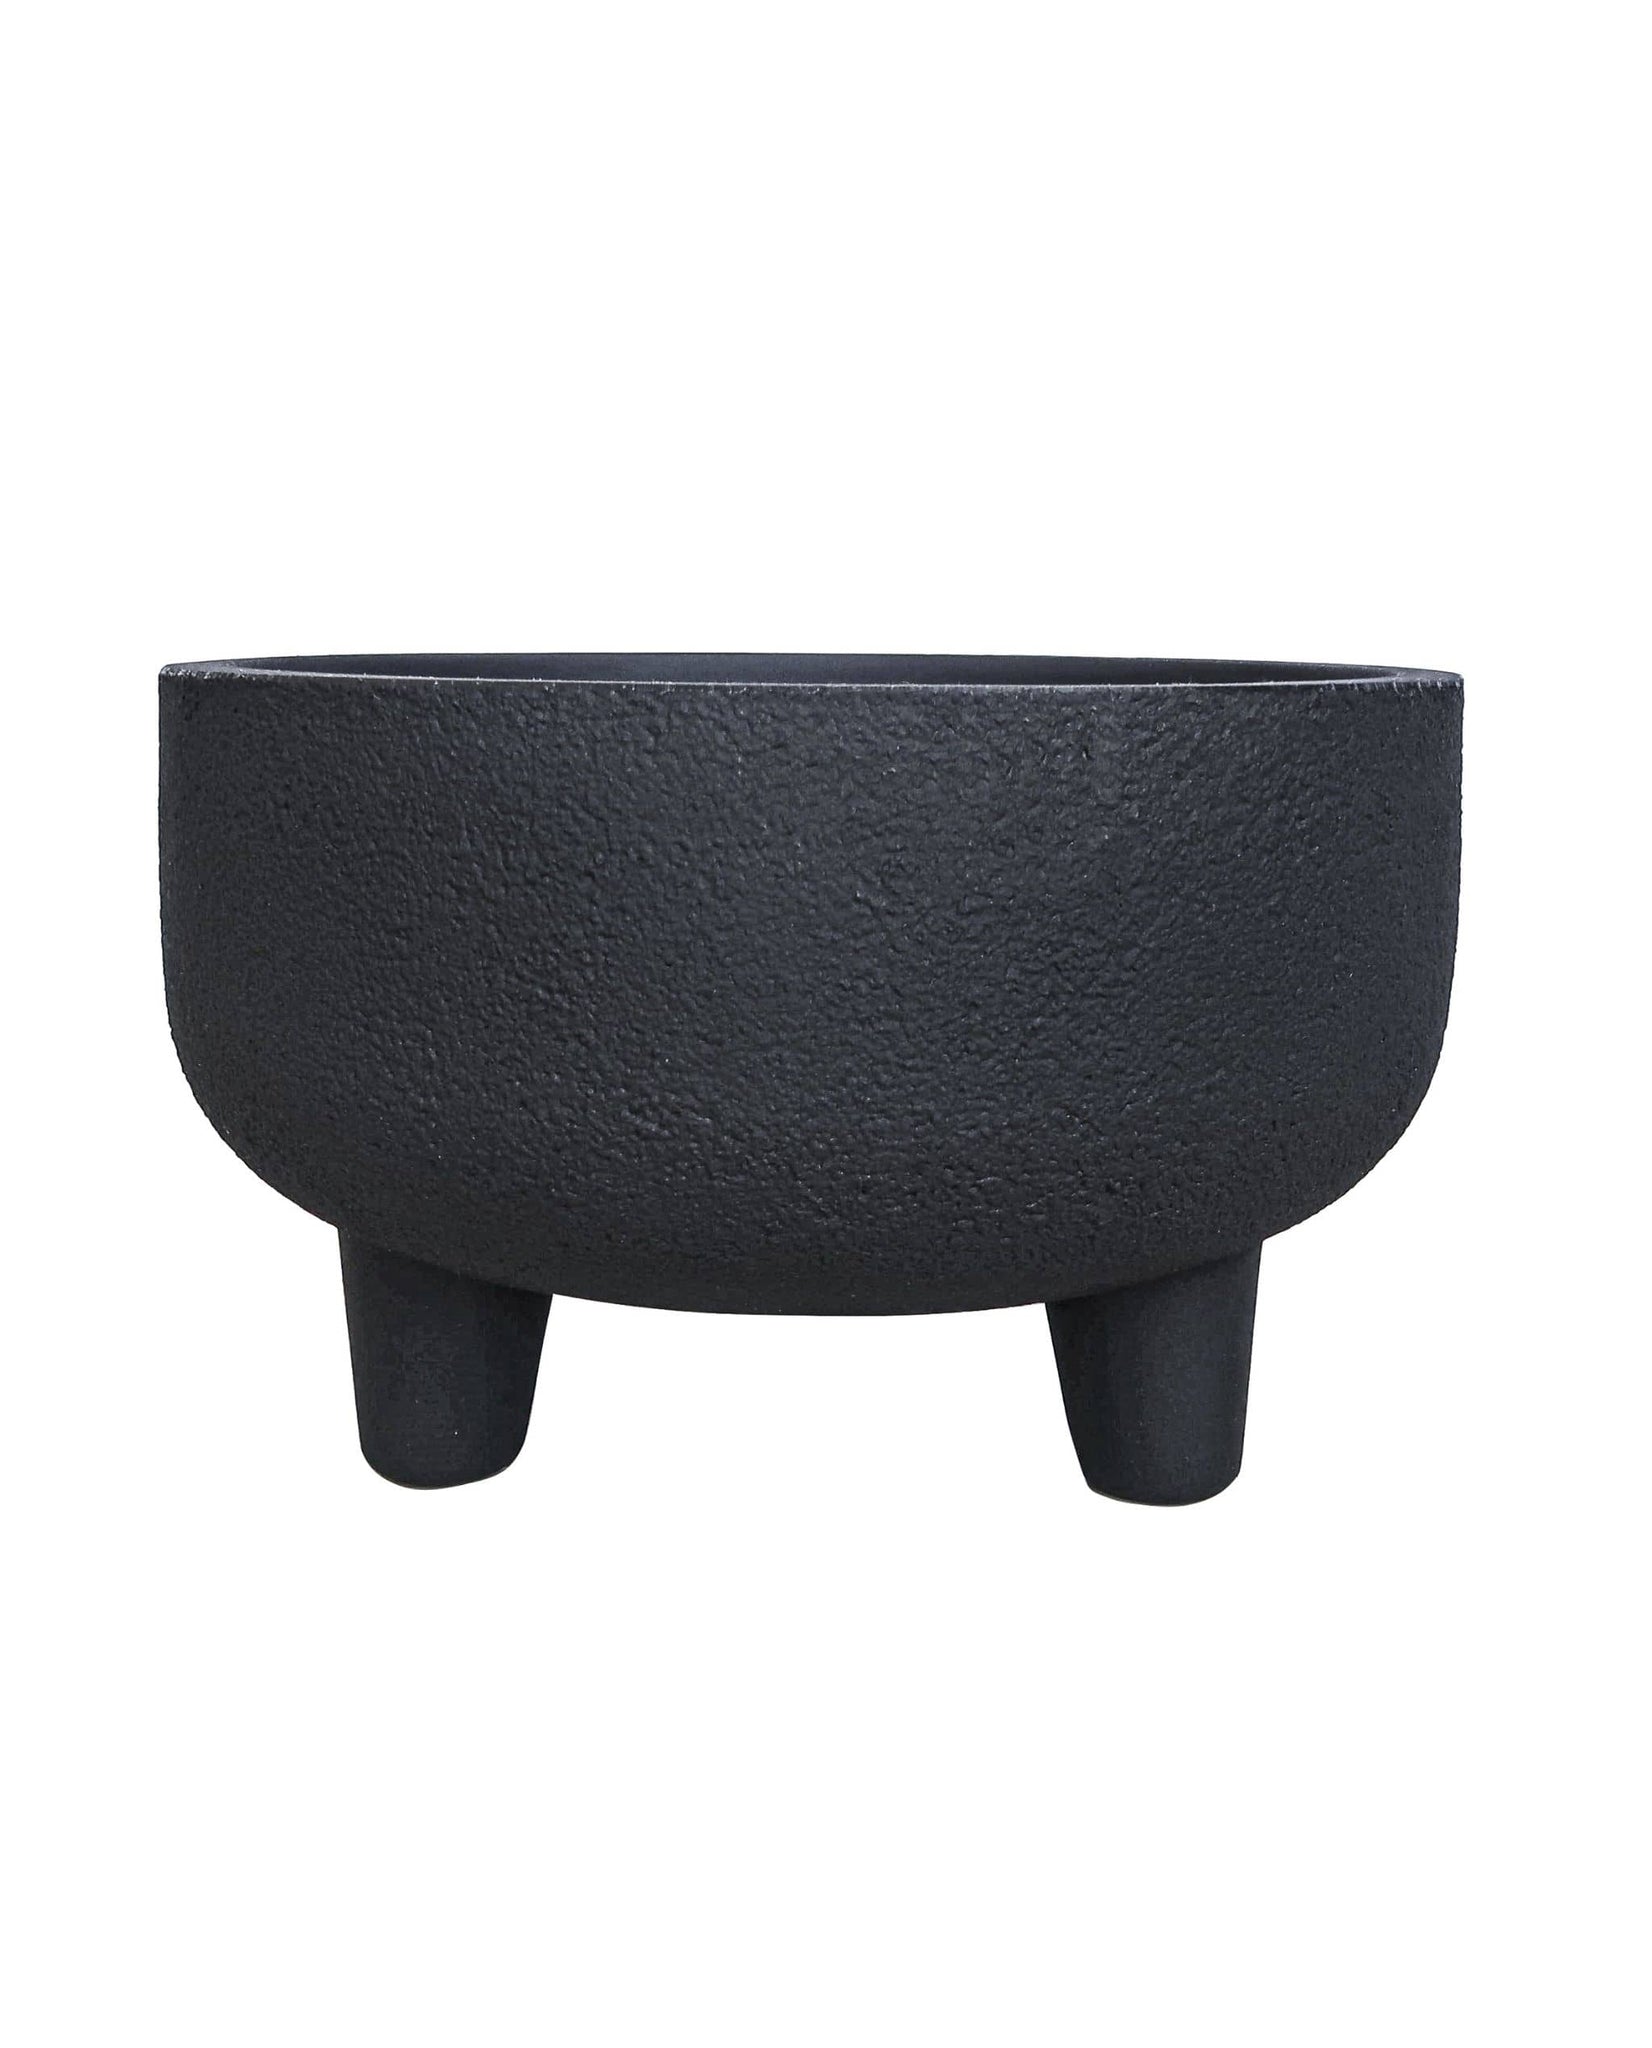 Side view of the Rustic Low planter showing the short legs and deeper pot in the colout Lead (black)